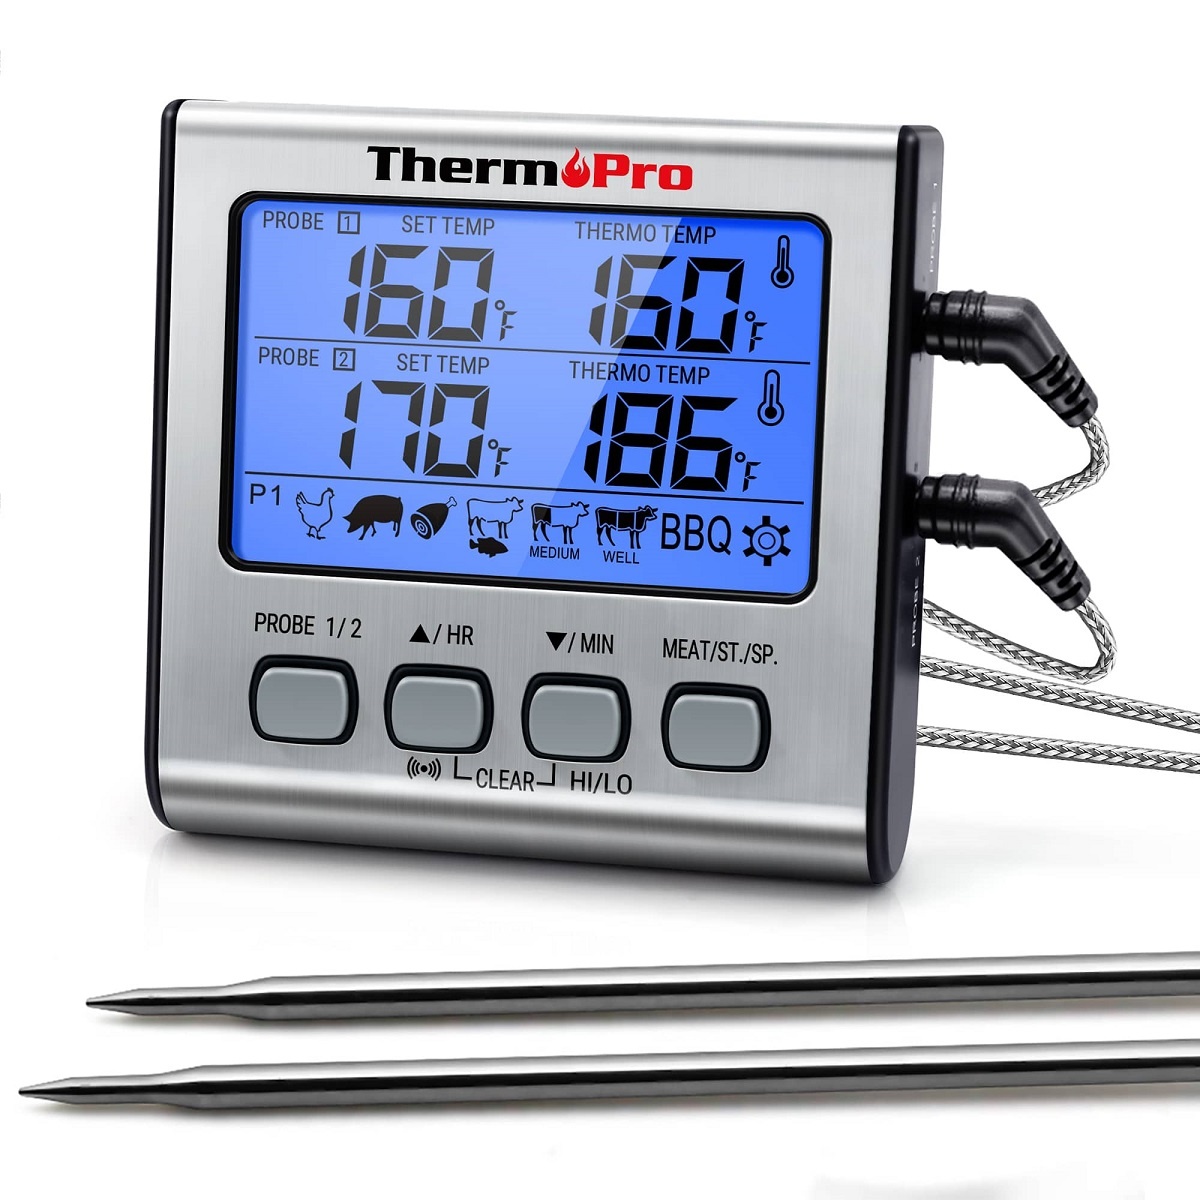 https://cdn.shoplightspeed.com/shops/659041/files/56064603/thermo-pro-thermo-pro-digital-food-thermometer-w-d.jpg